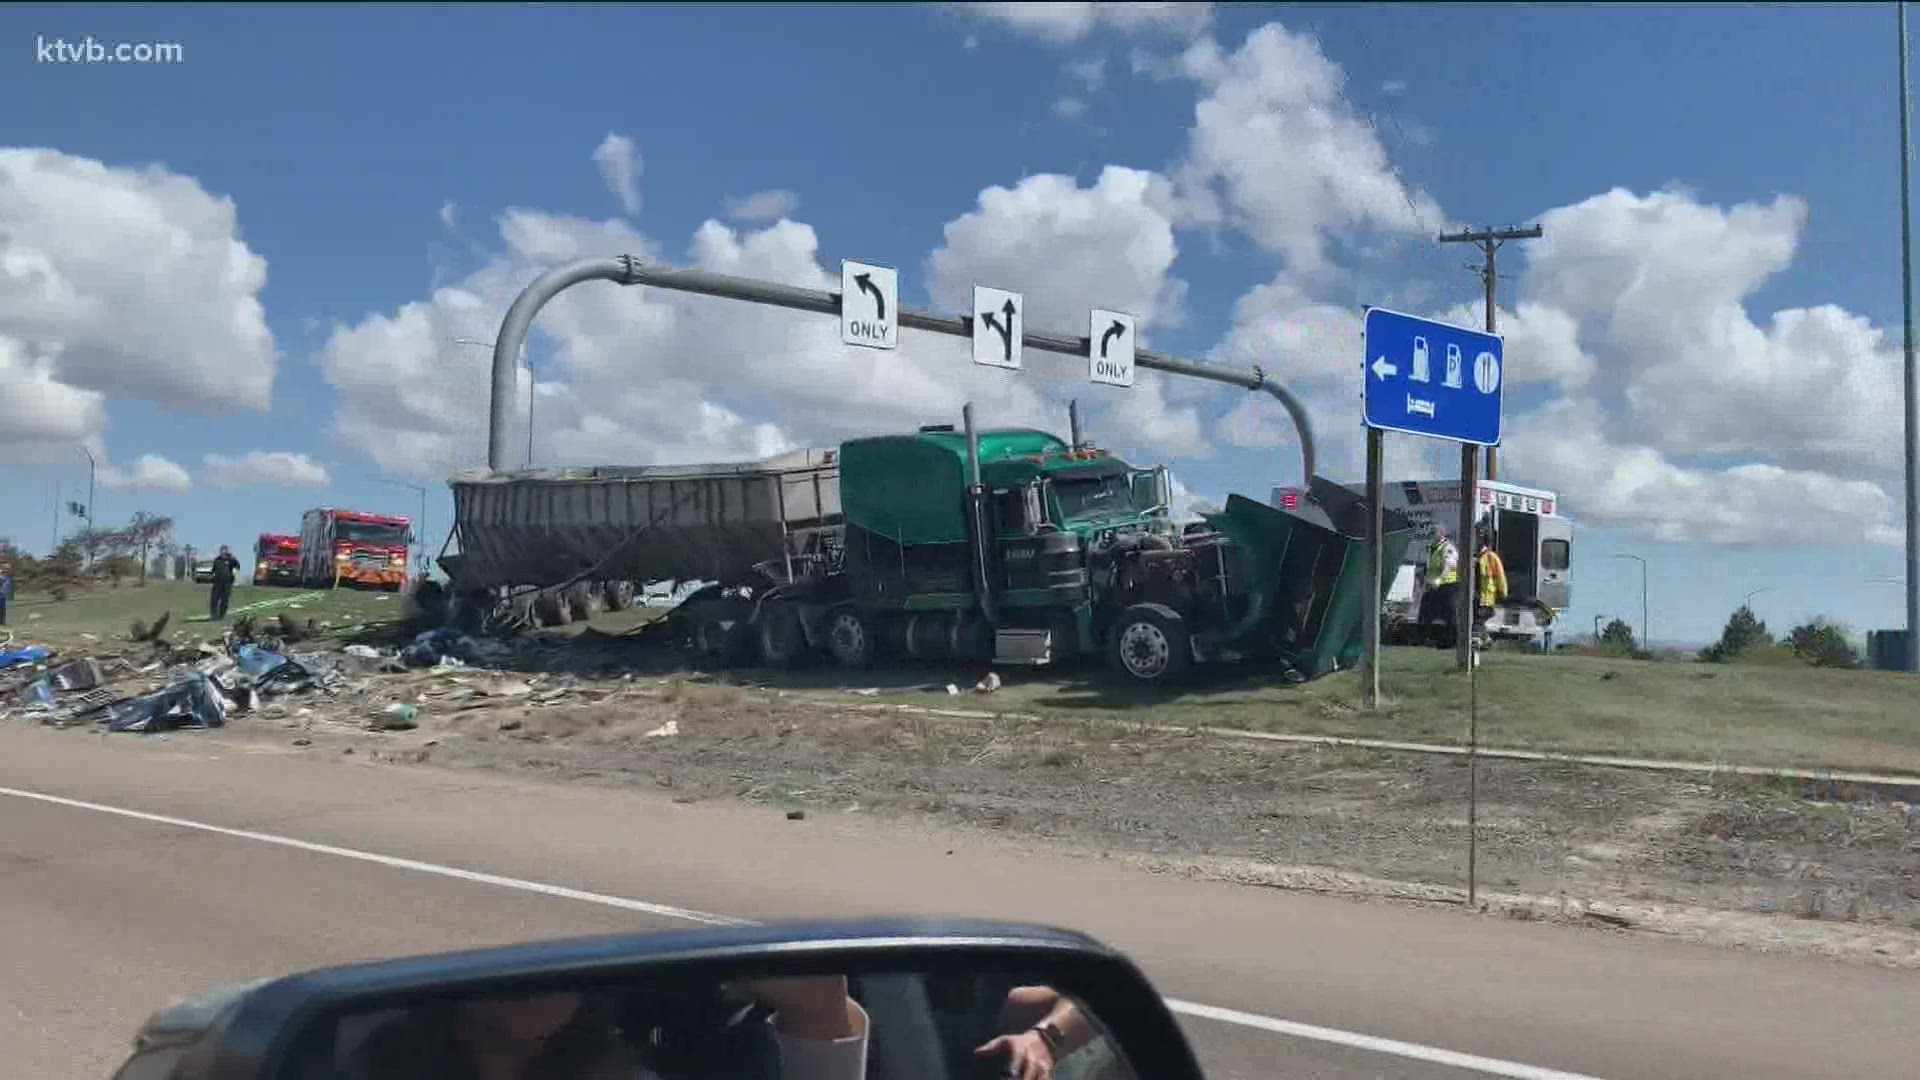 Two semi trucks are badly damaged. Idaho State Police are on scene to investigate.